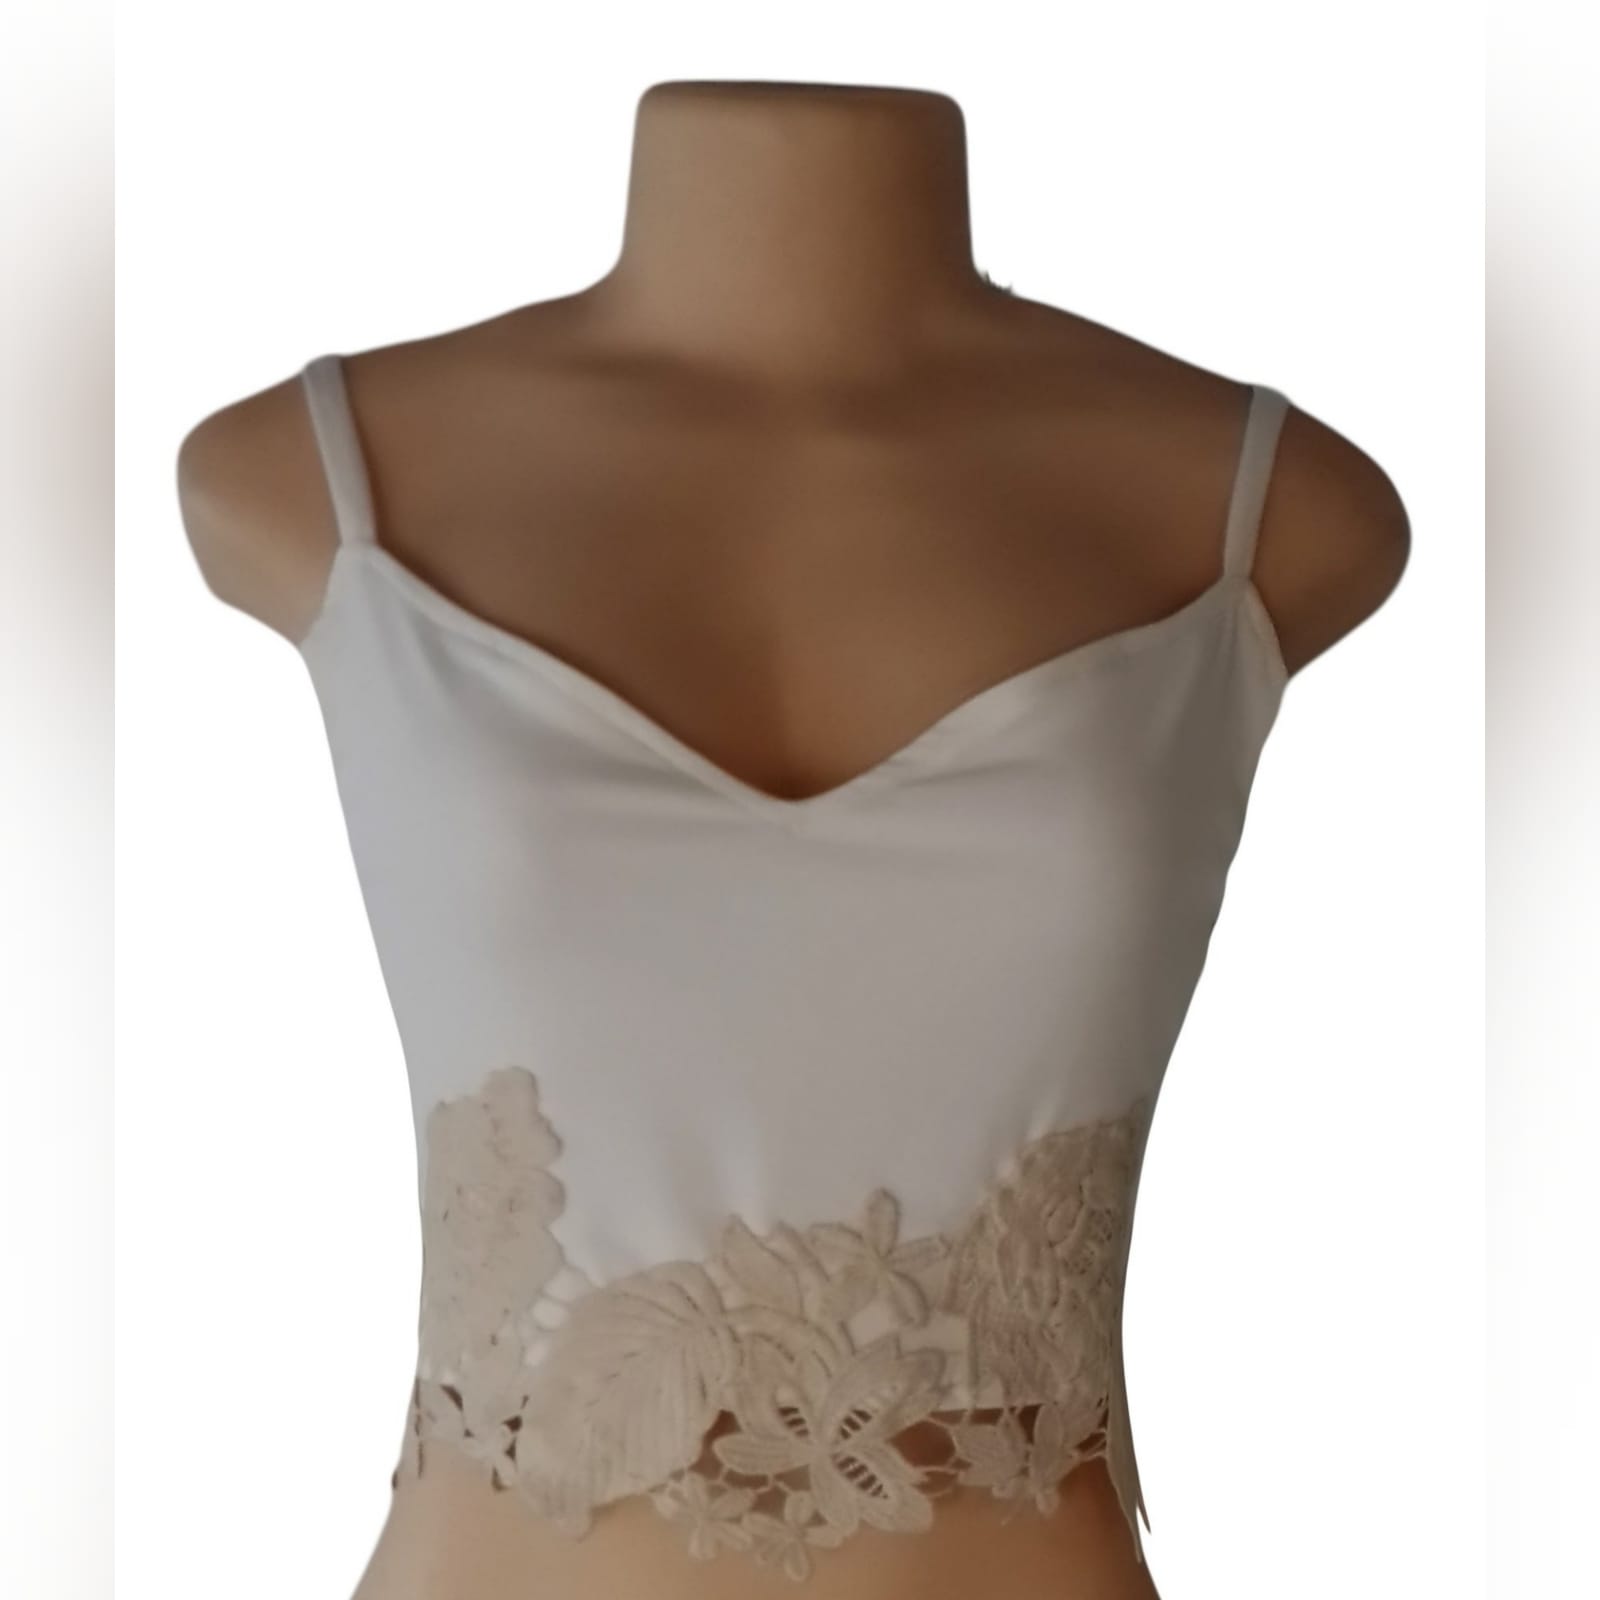 Cream and beige crop top 3 cream and beige crop top with a sweetheart neckline and lace hem detail